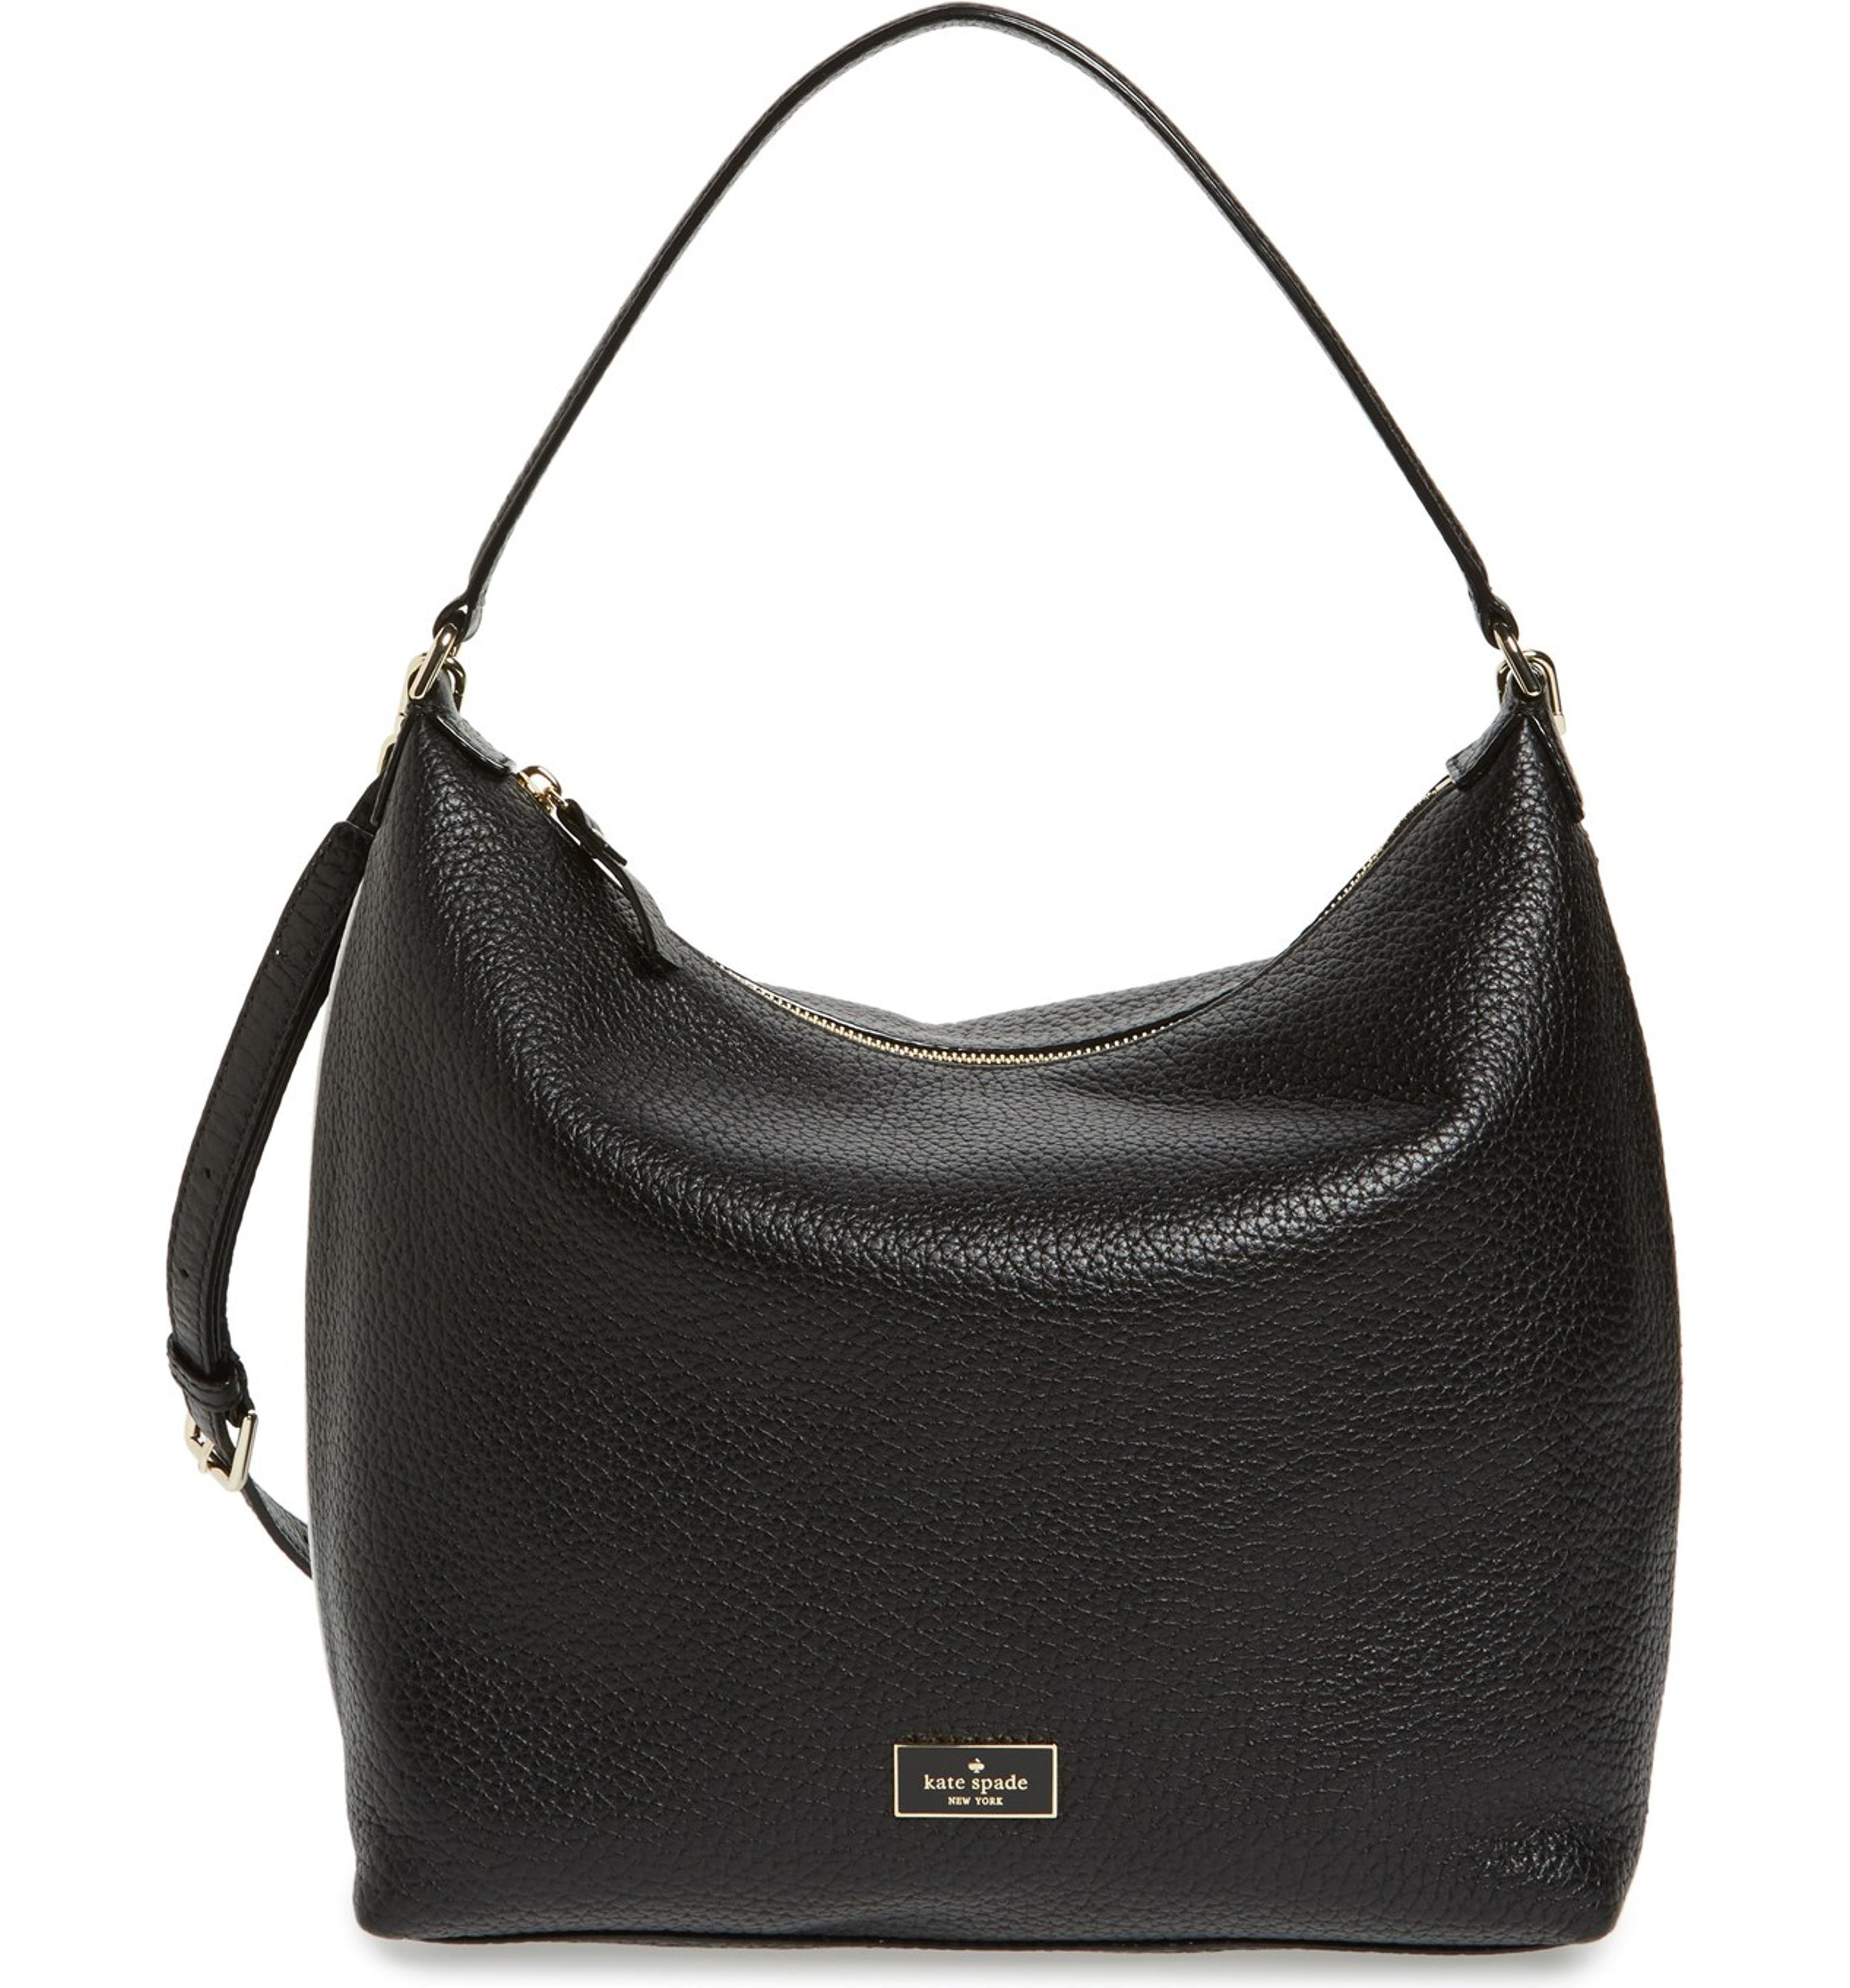 kate spade new york 'prospect place - kaia' leather hobo | Nordstrom